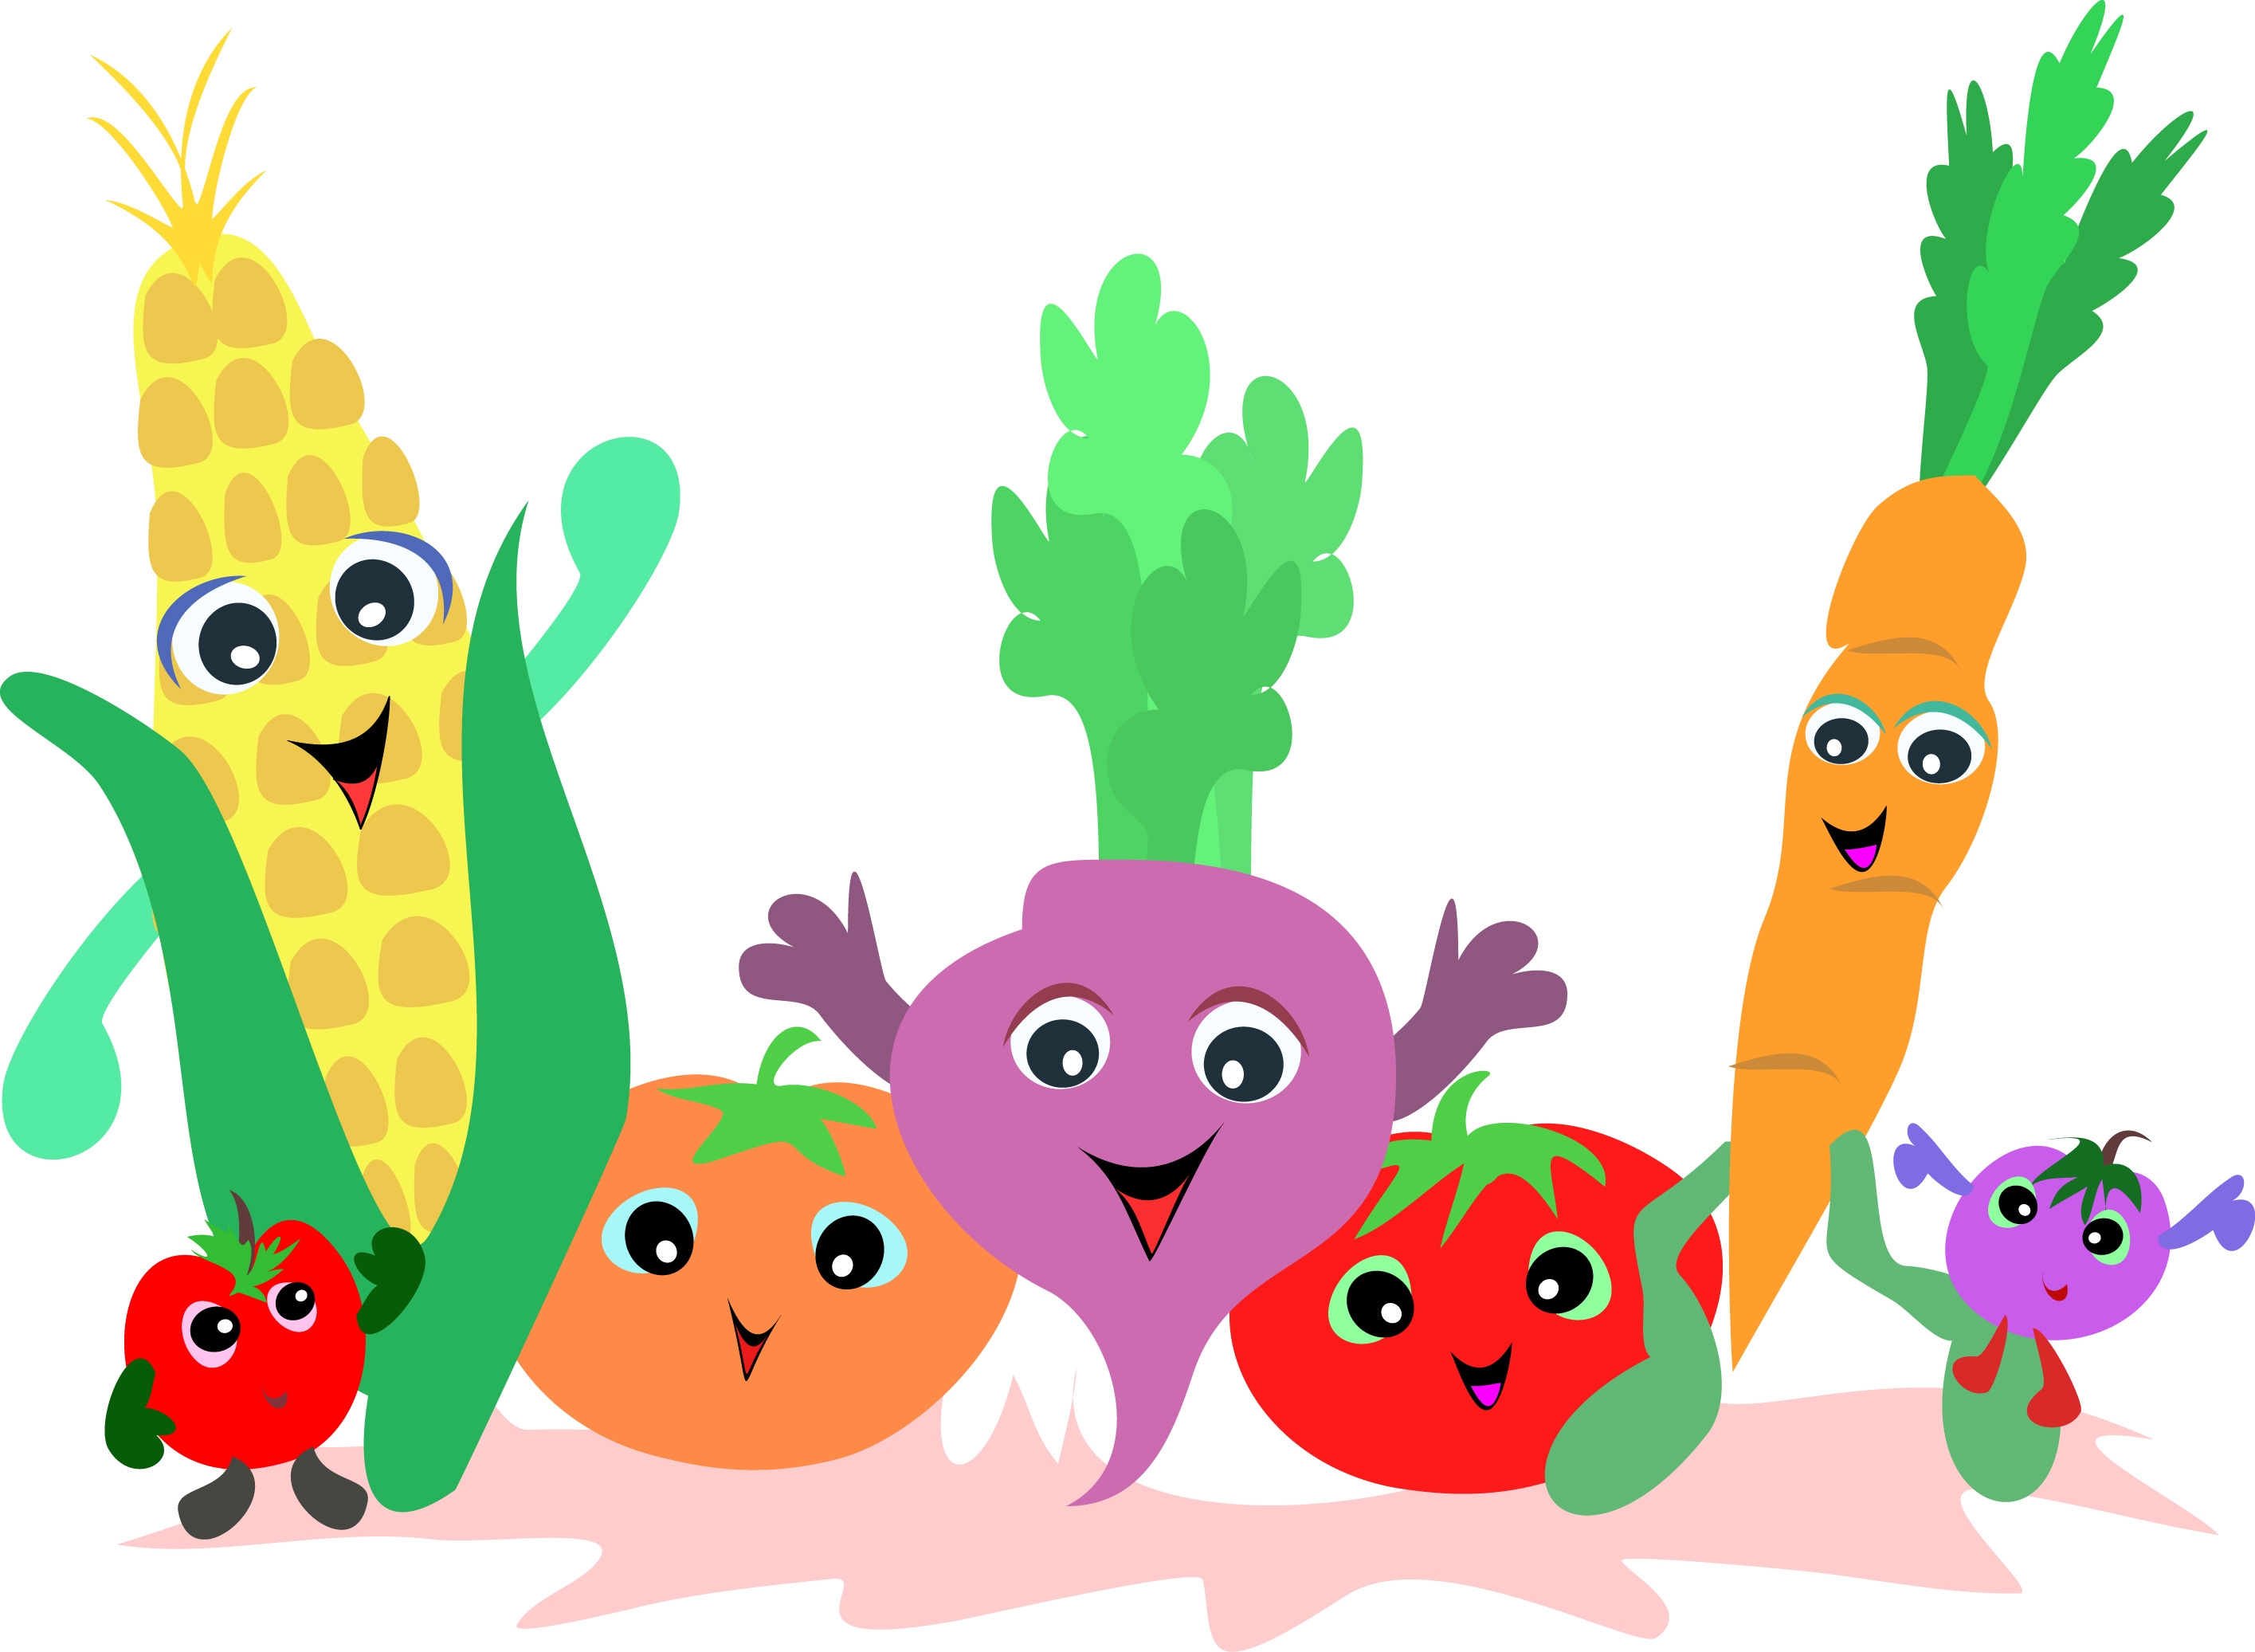 Free Vegetable Border Cliparts, Download Free Clip Art, Free.